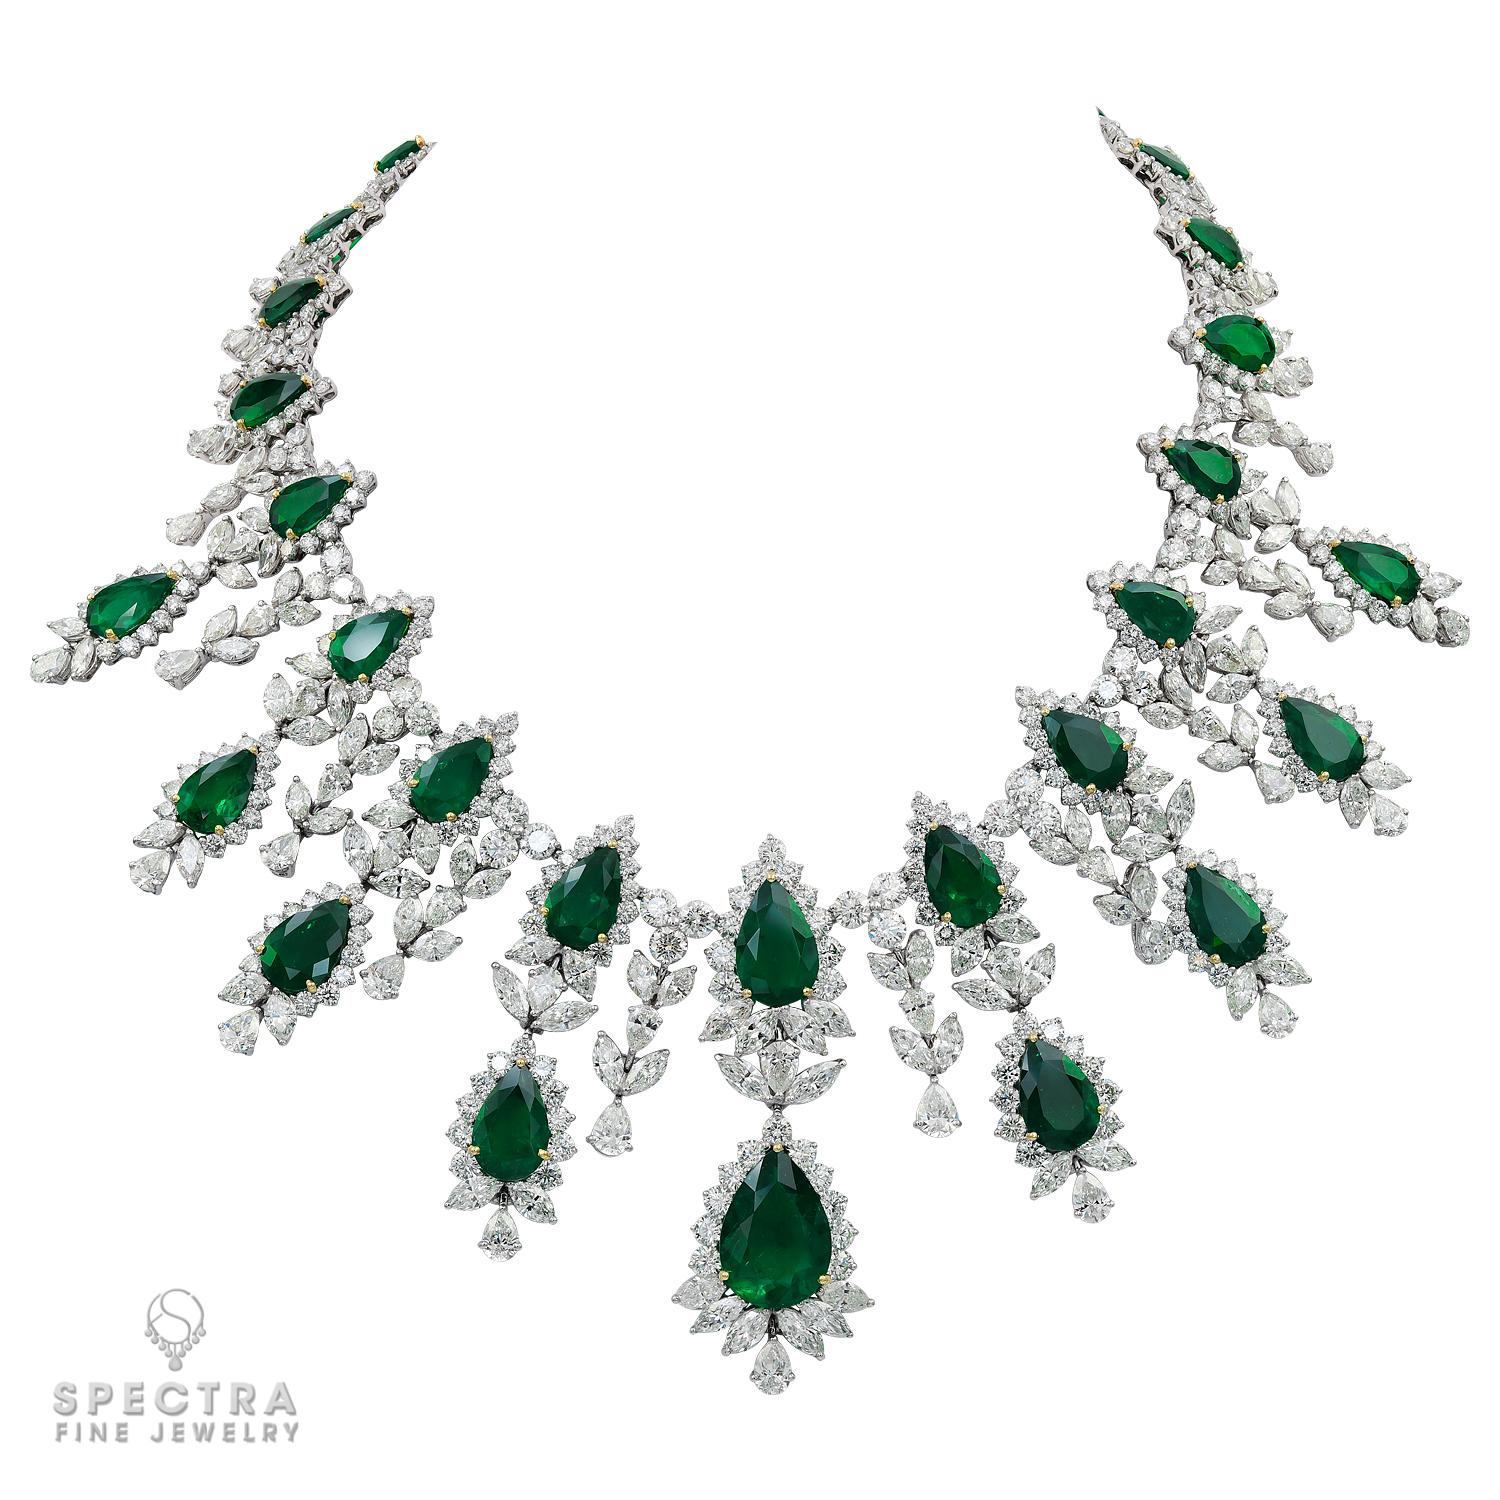 This exquisite Spectra Fine Jewelry Colombian Emerald Demi Parure Suite, made in the Contemporary era, circa 2010s, is comprised of two related yet distinctive piece, featuring a bib necklace with nine pendants and equally dramatic drop earrings.